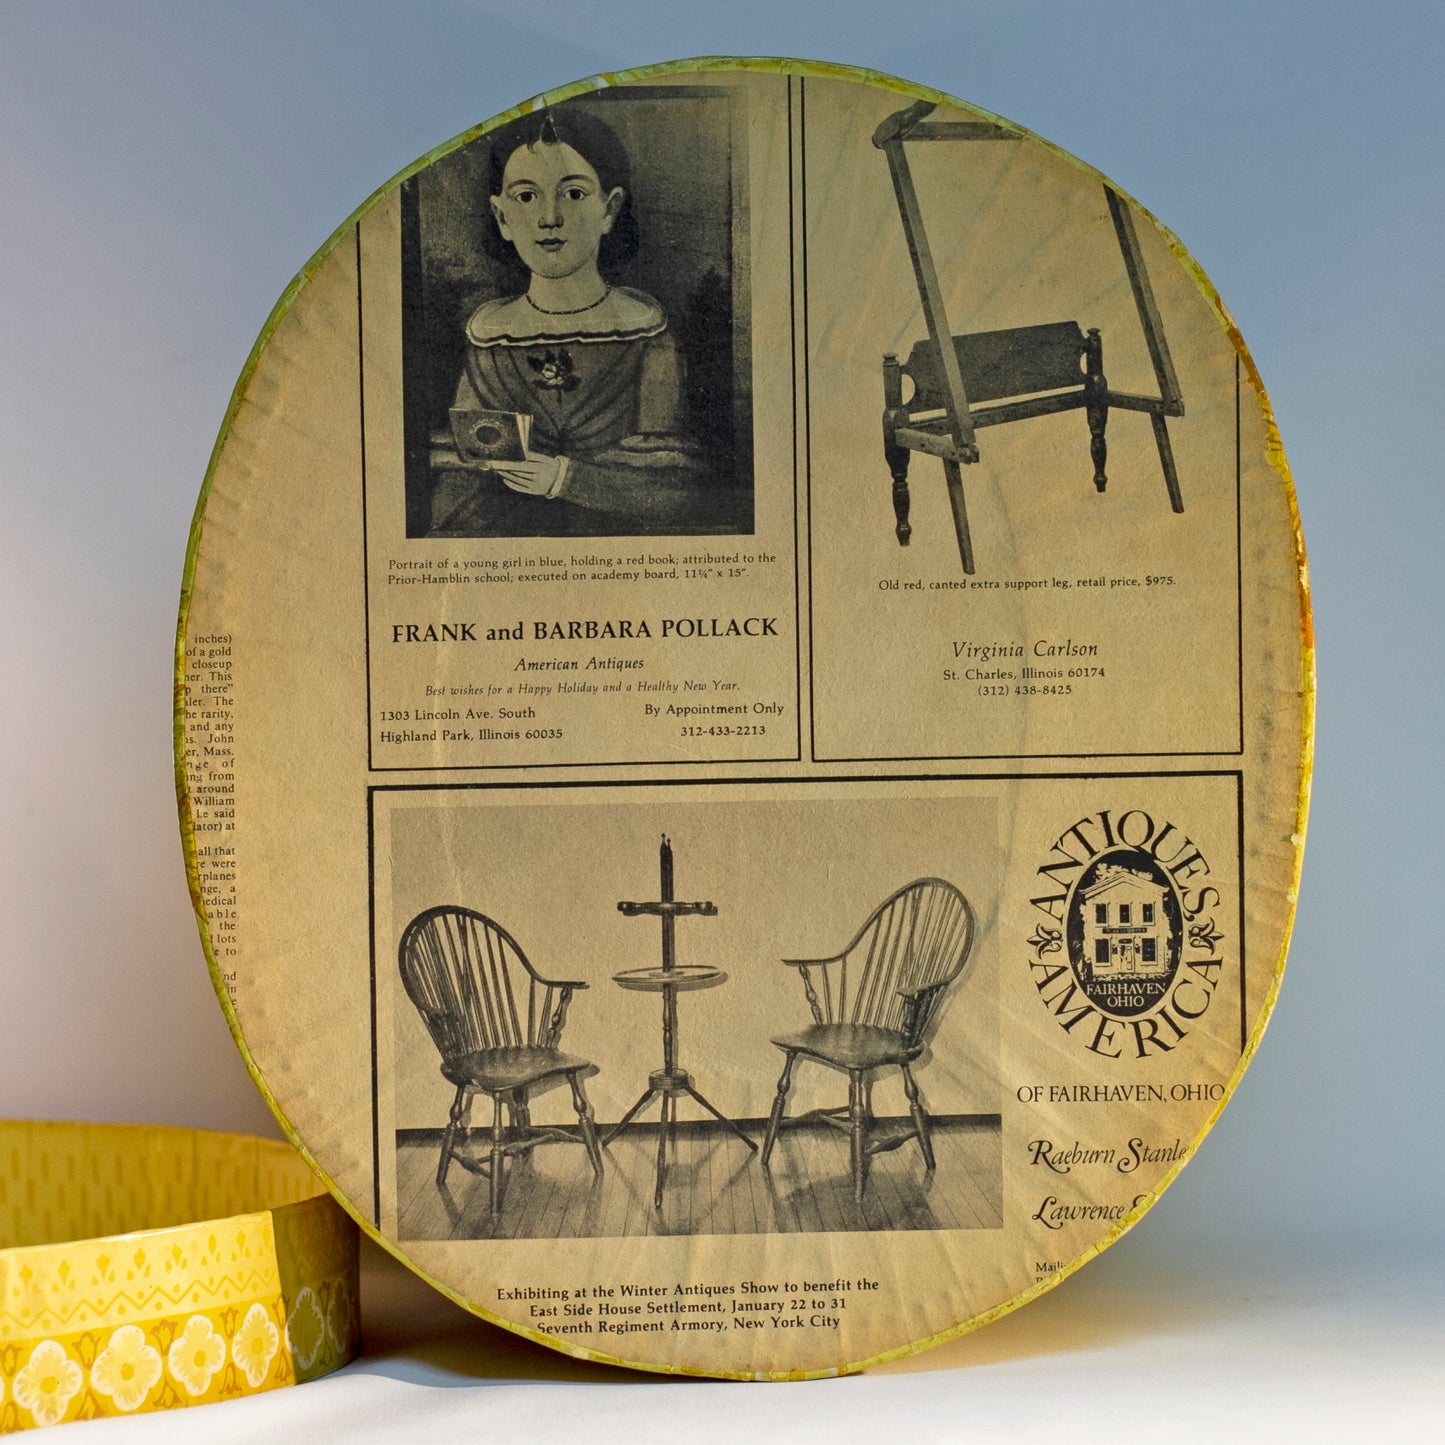 Reproduction of a "BRIDE'S BOX" made from slightly oval shaped large hat box covered in vintage yellow wallpaper featuring lambs and a Colonial girl. Inside and bottom papered with pages from the Maine Antique Digest, September 1977. Measures about 10" high by 15" in length by 13" wide.